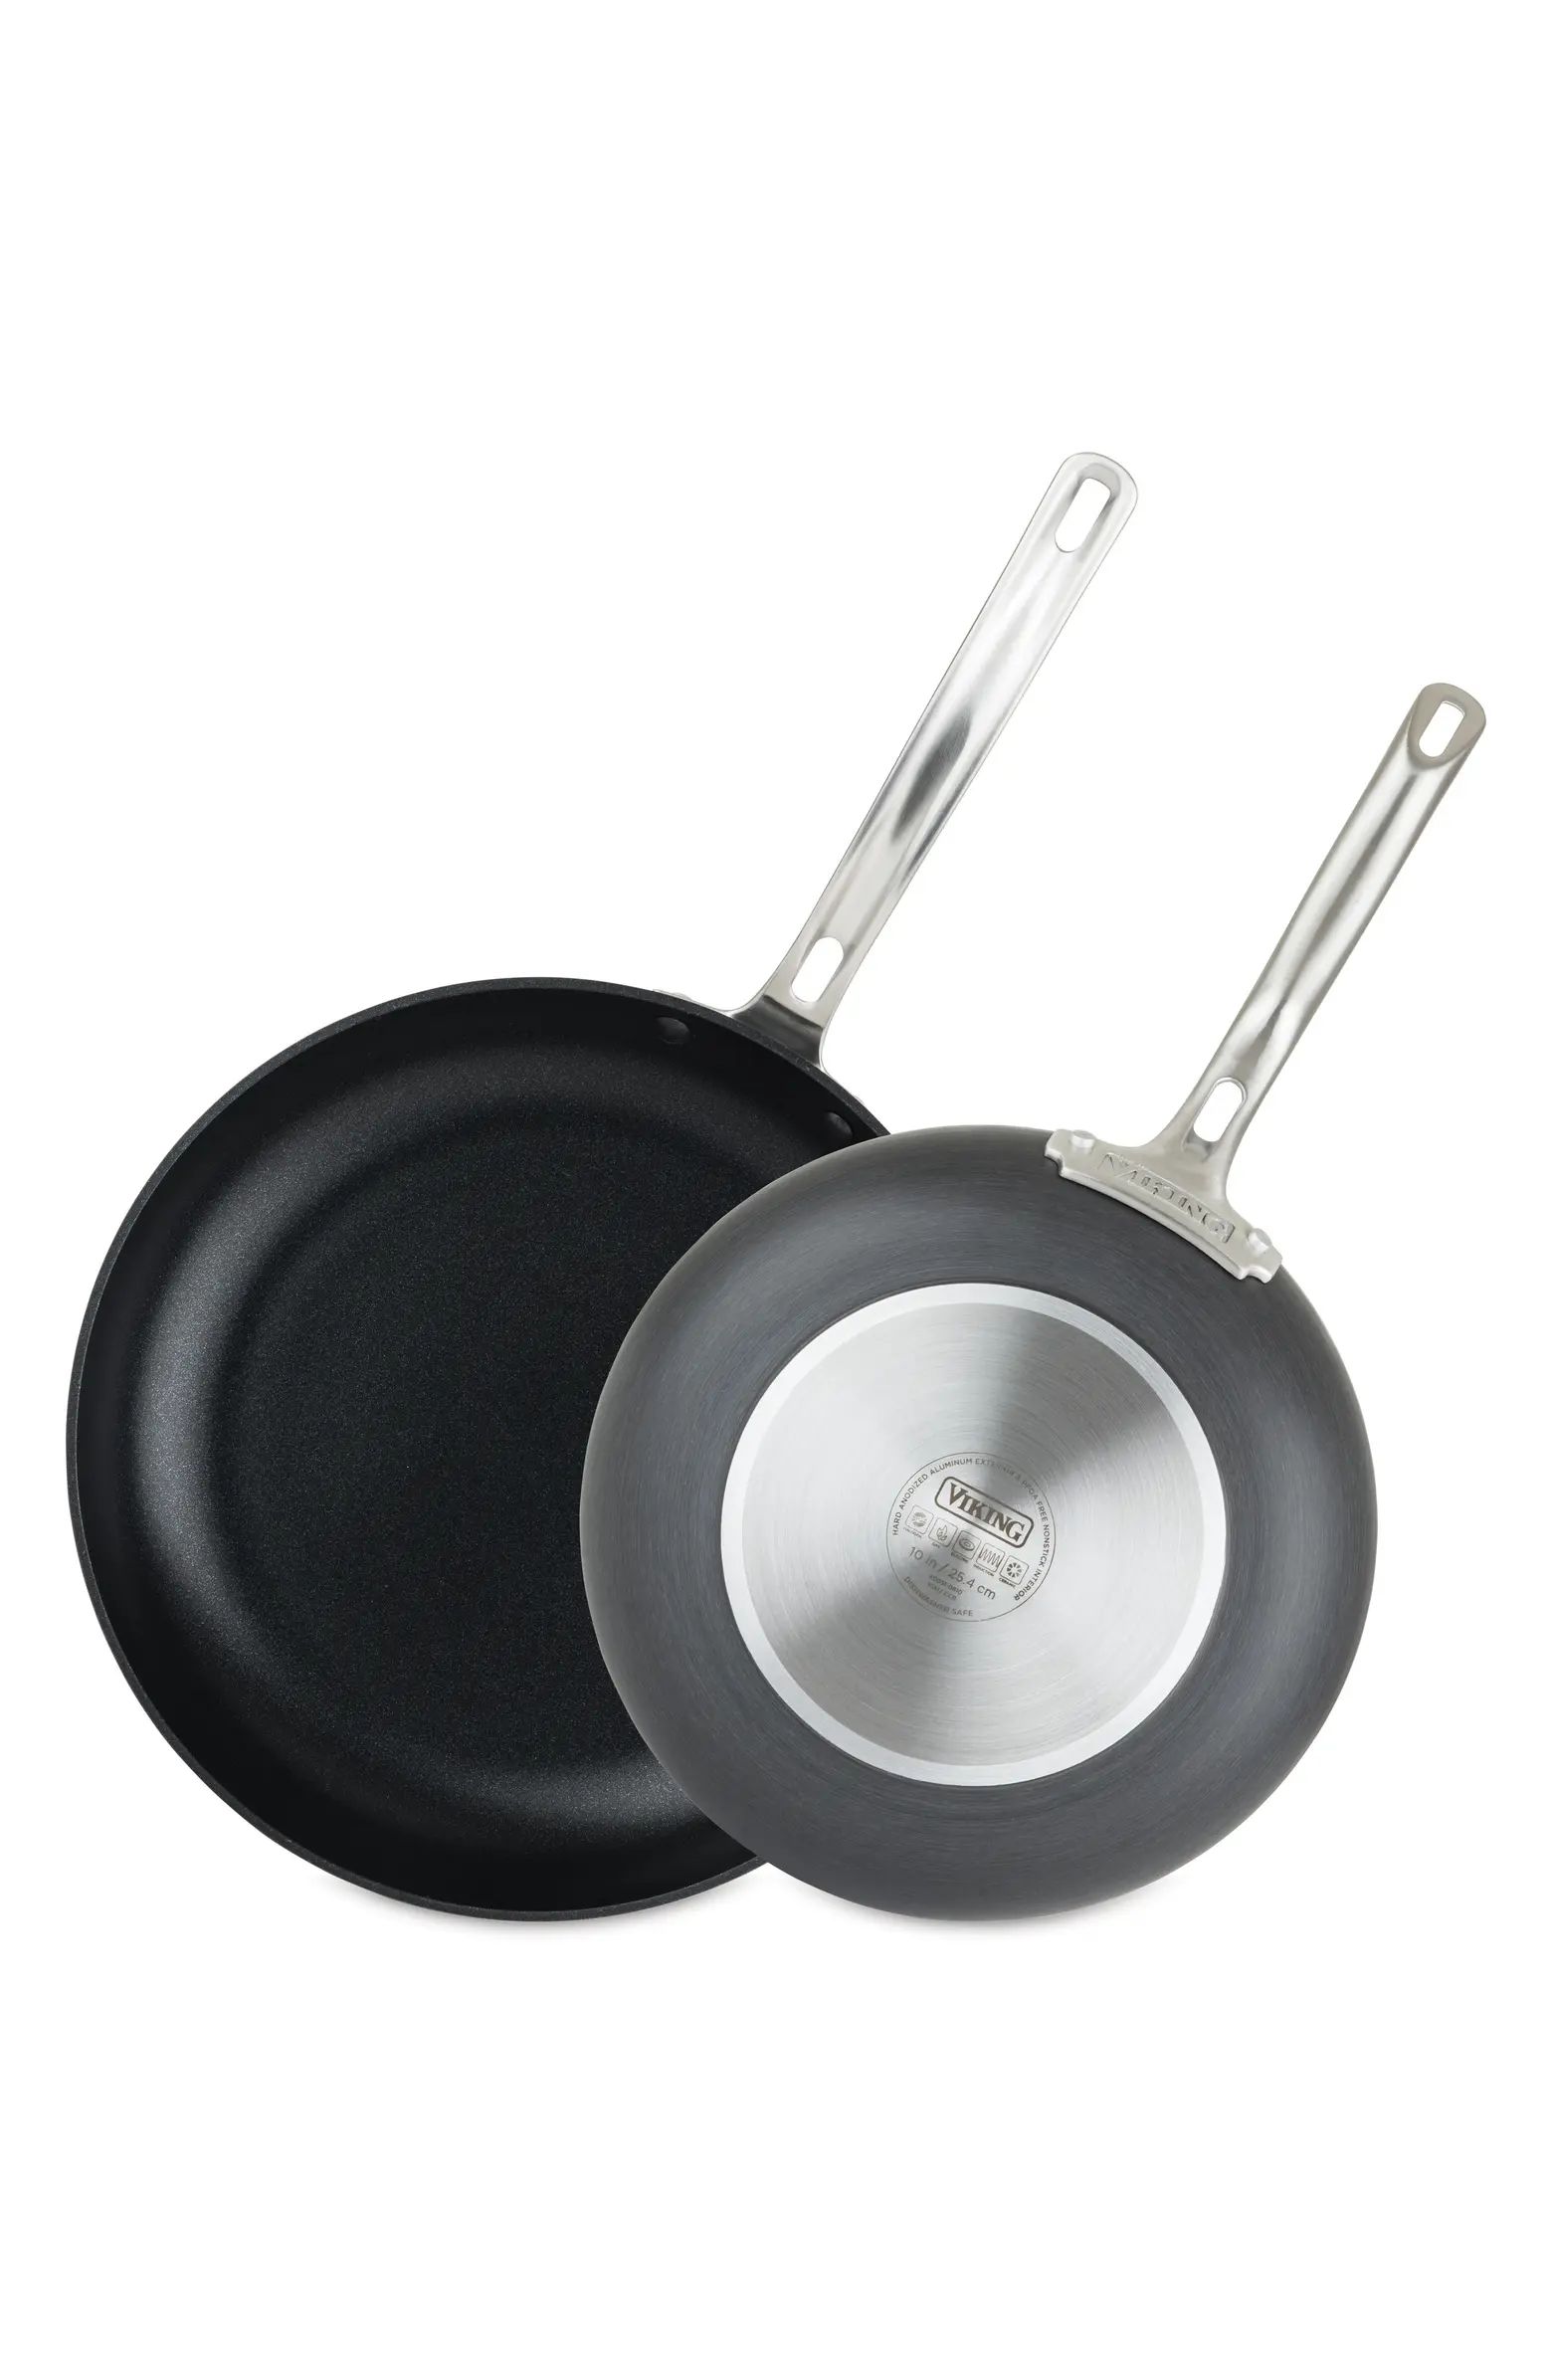 Hard Anodized Nonstick 10-Inch & 12-Inch Fry Pans | Nordstrom